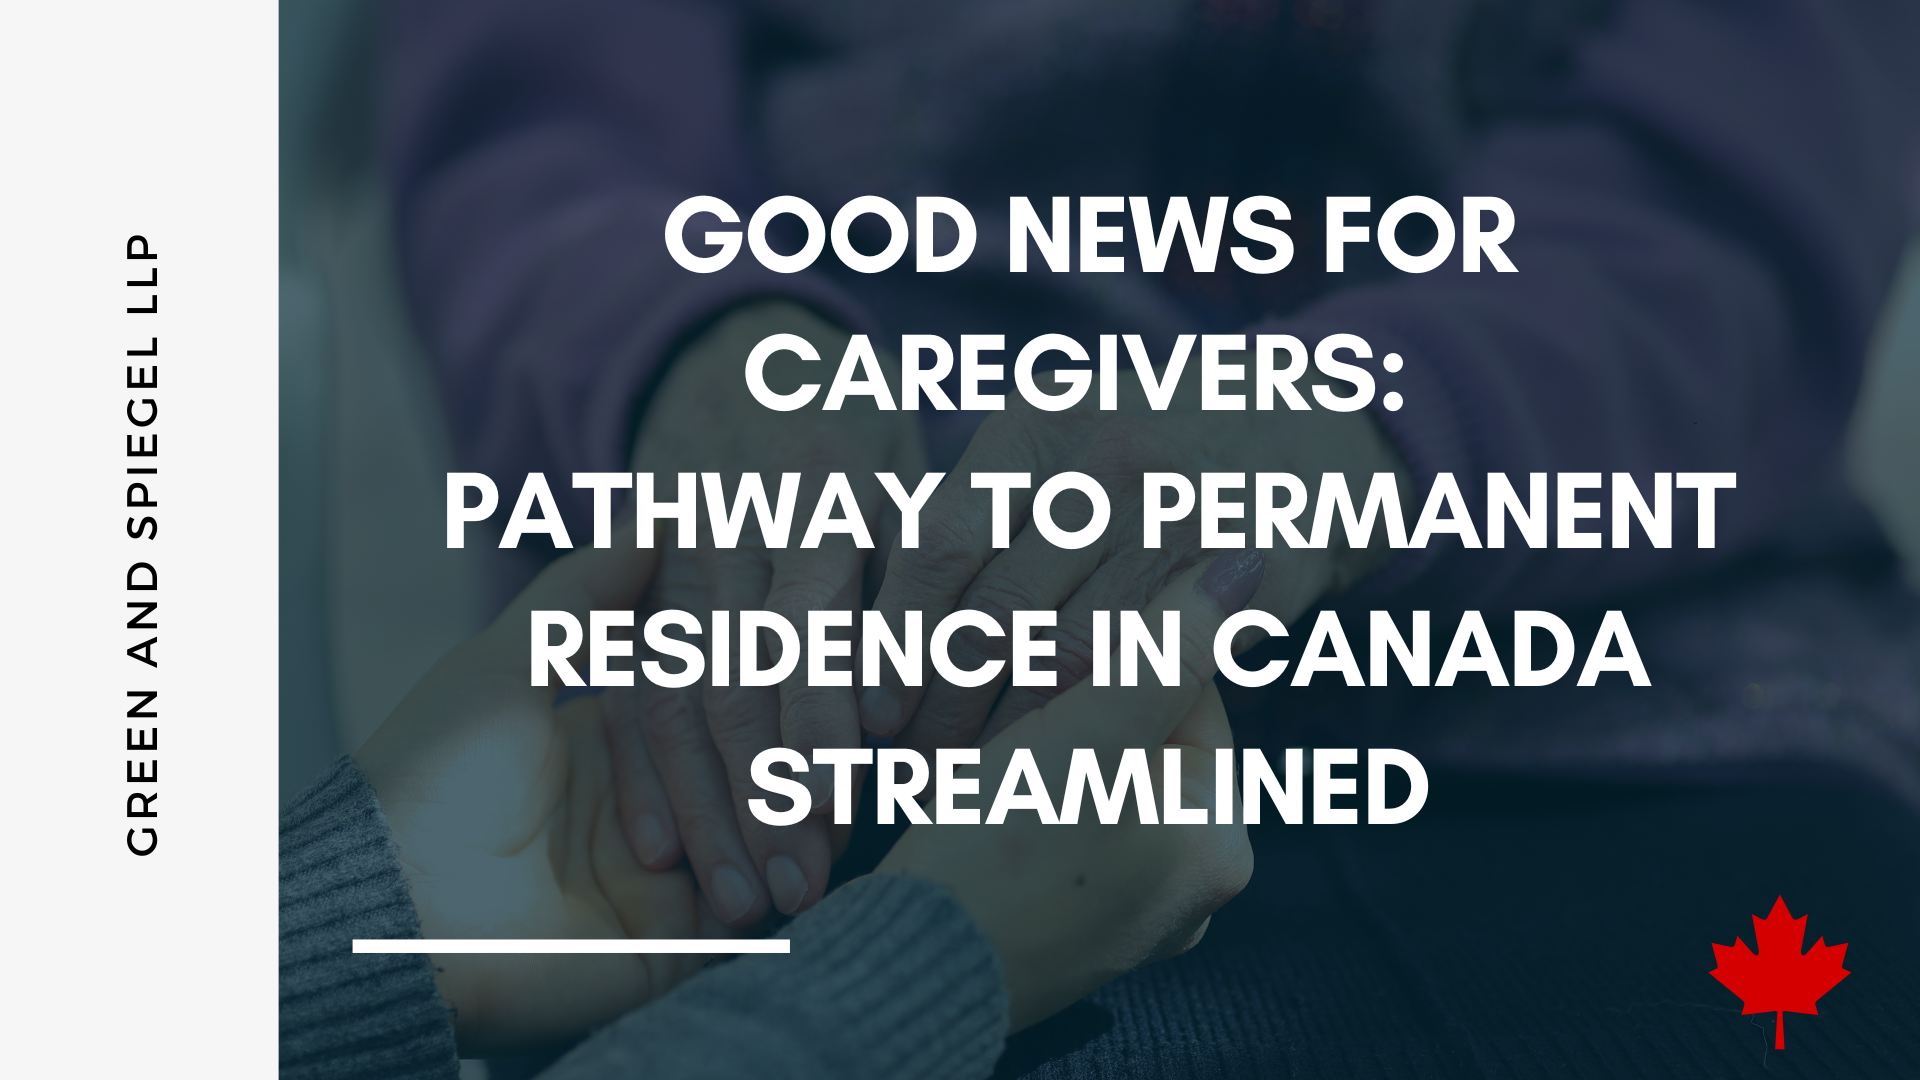 GOOD NEWS FOR CAREGIVERS: PATHWAY TO PERMANENT RESIDENCE IN CANADA STREAMLINED